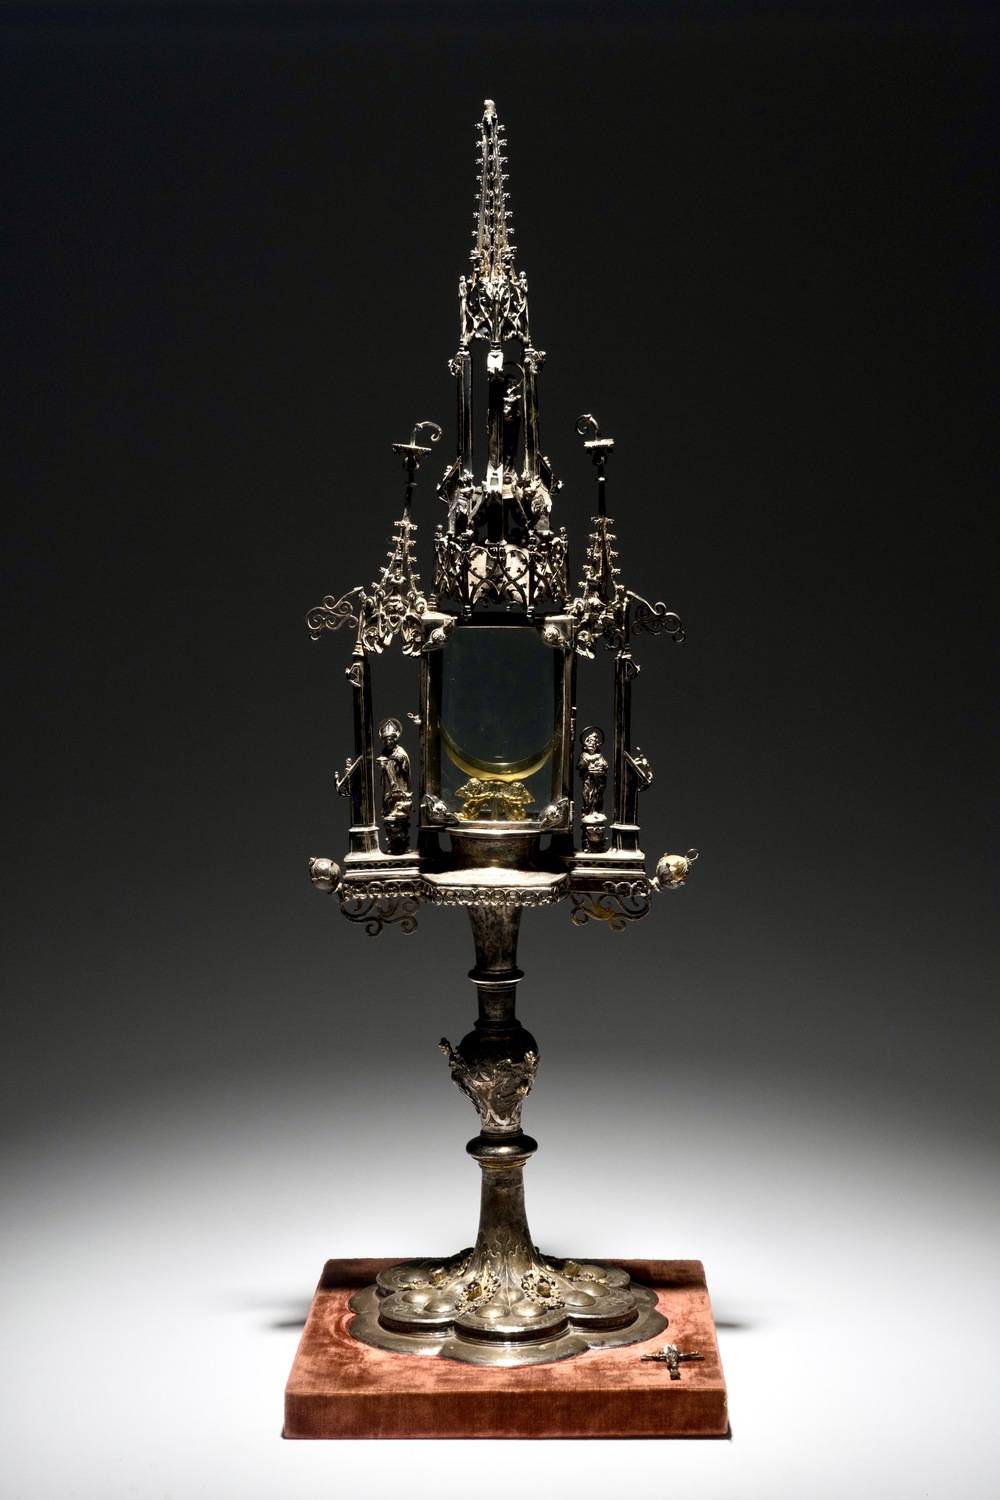 A gilt silver monstrance with inlaid semi-precious stones, dated 1614